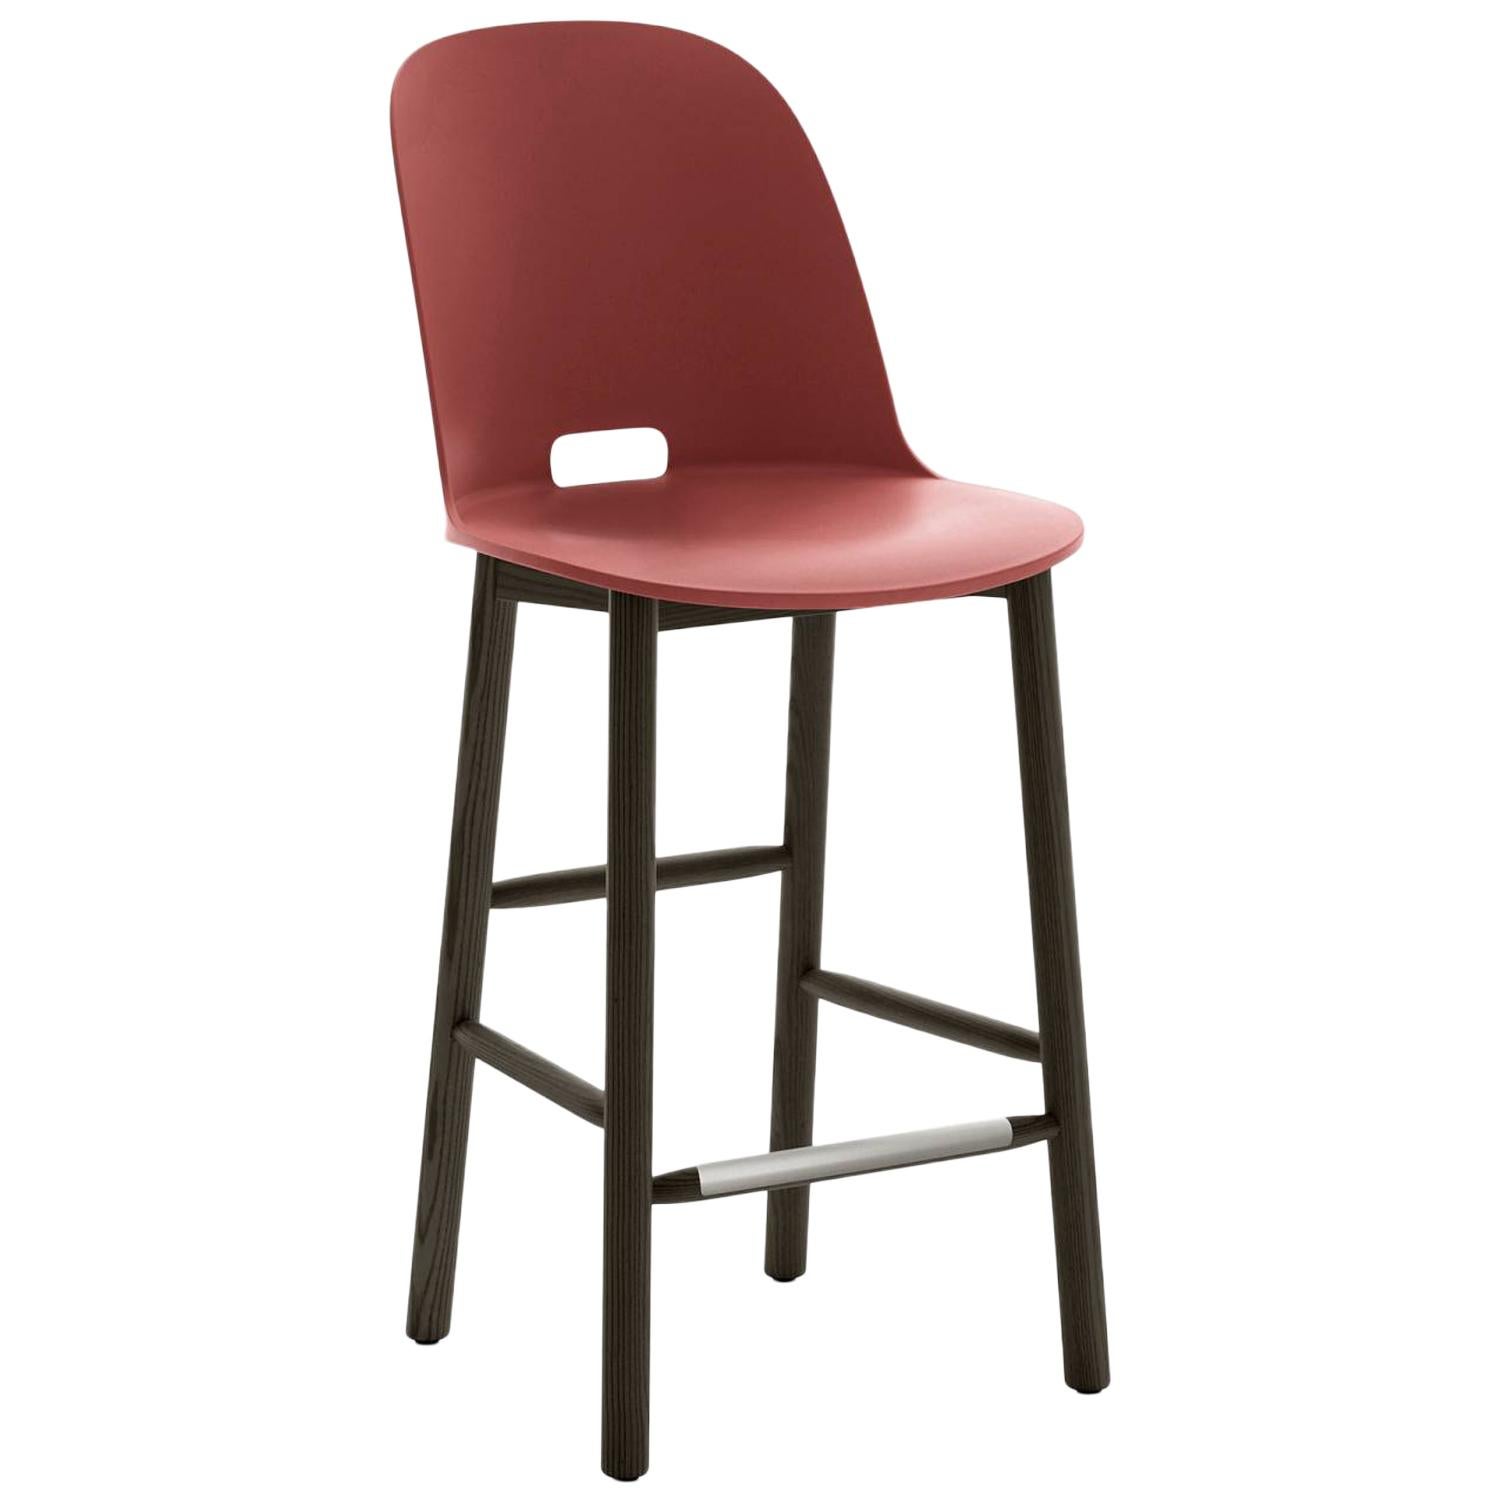 Emeco Alfi Counter Stool in Red & Dark Ash with High Back by Jasper Morrison